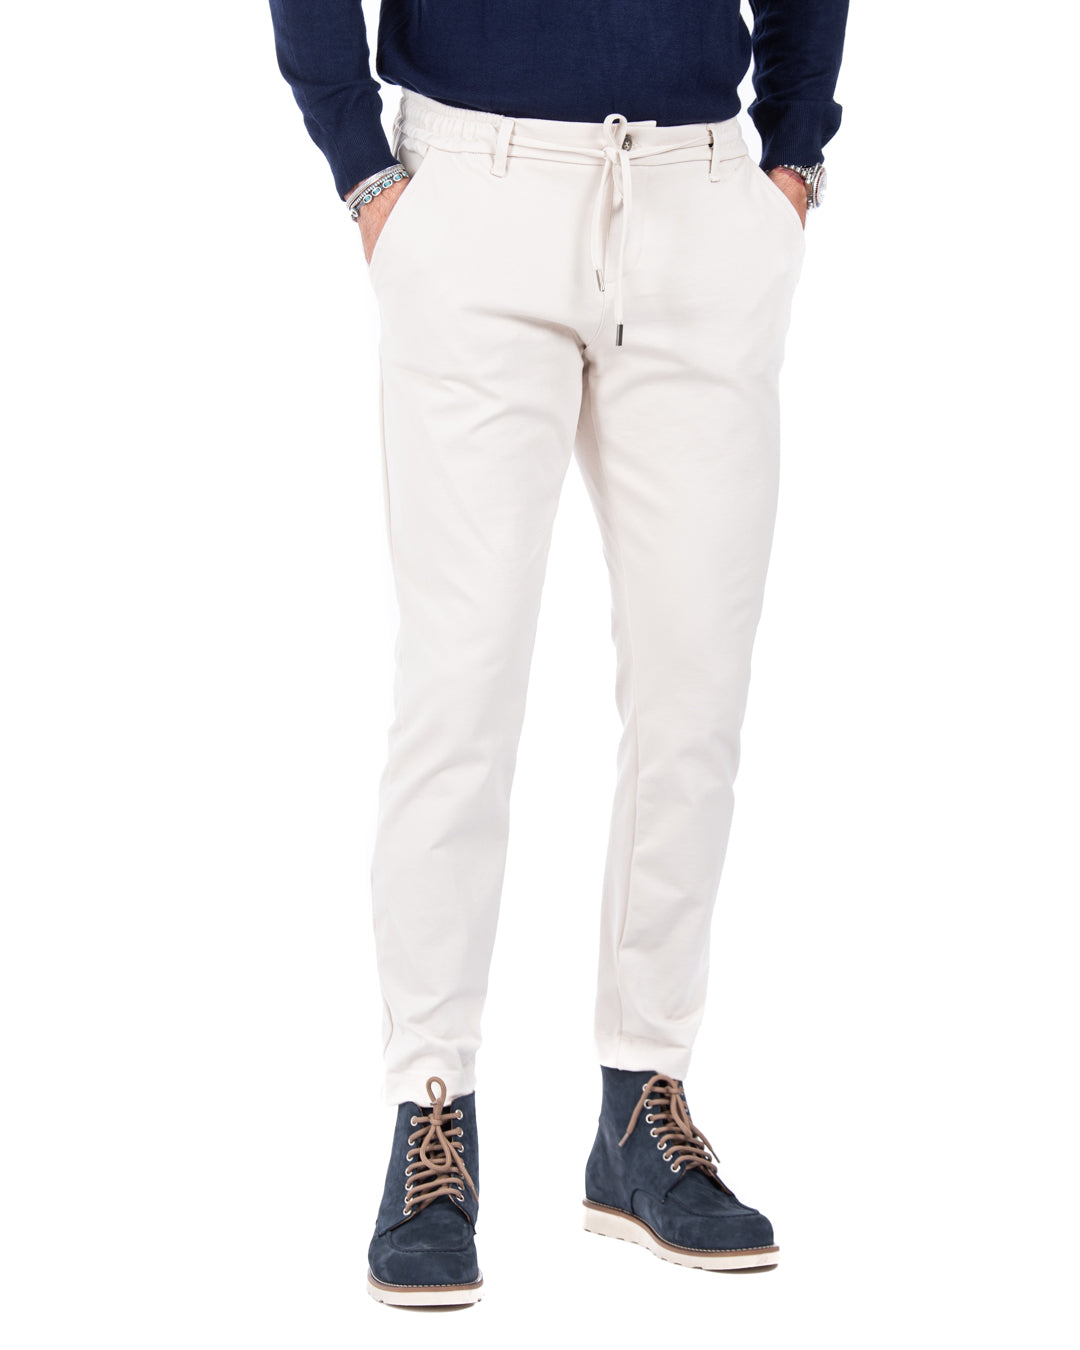 Mustang - cream milan stitch trousers